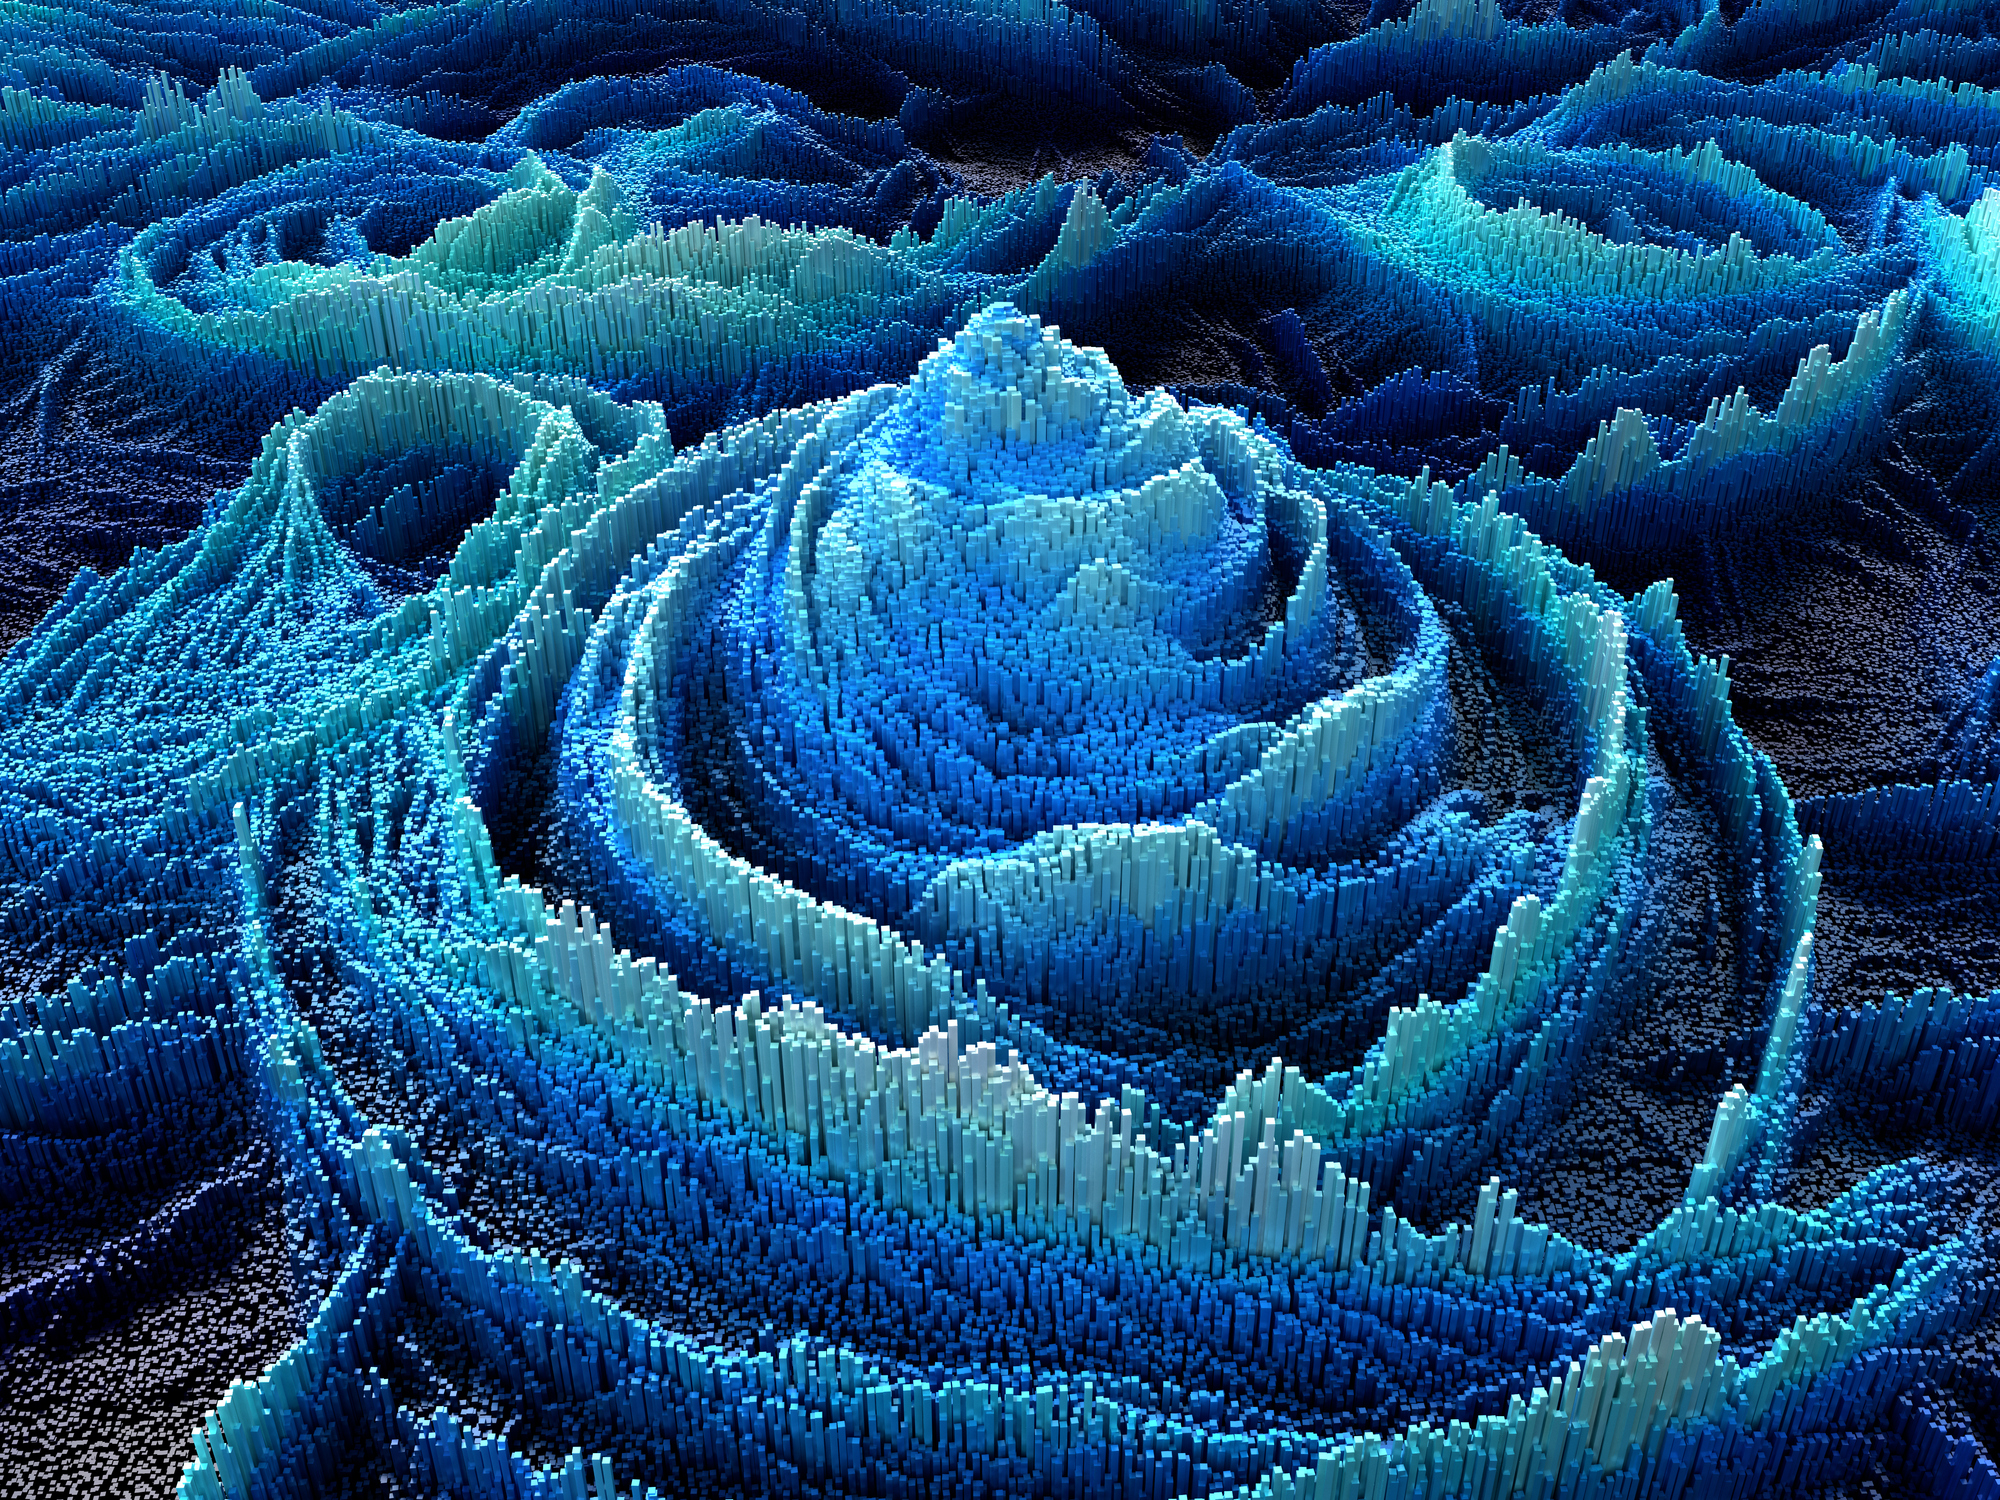 Swirled blue waves created by tiny bars, resembling bar graphs.